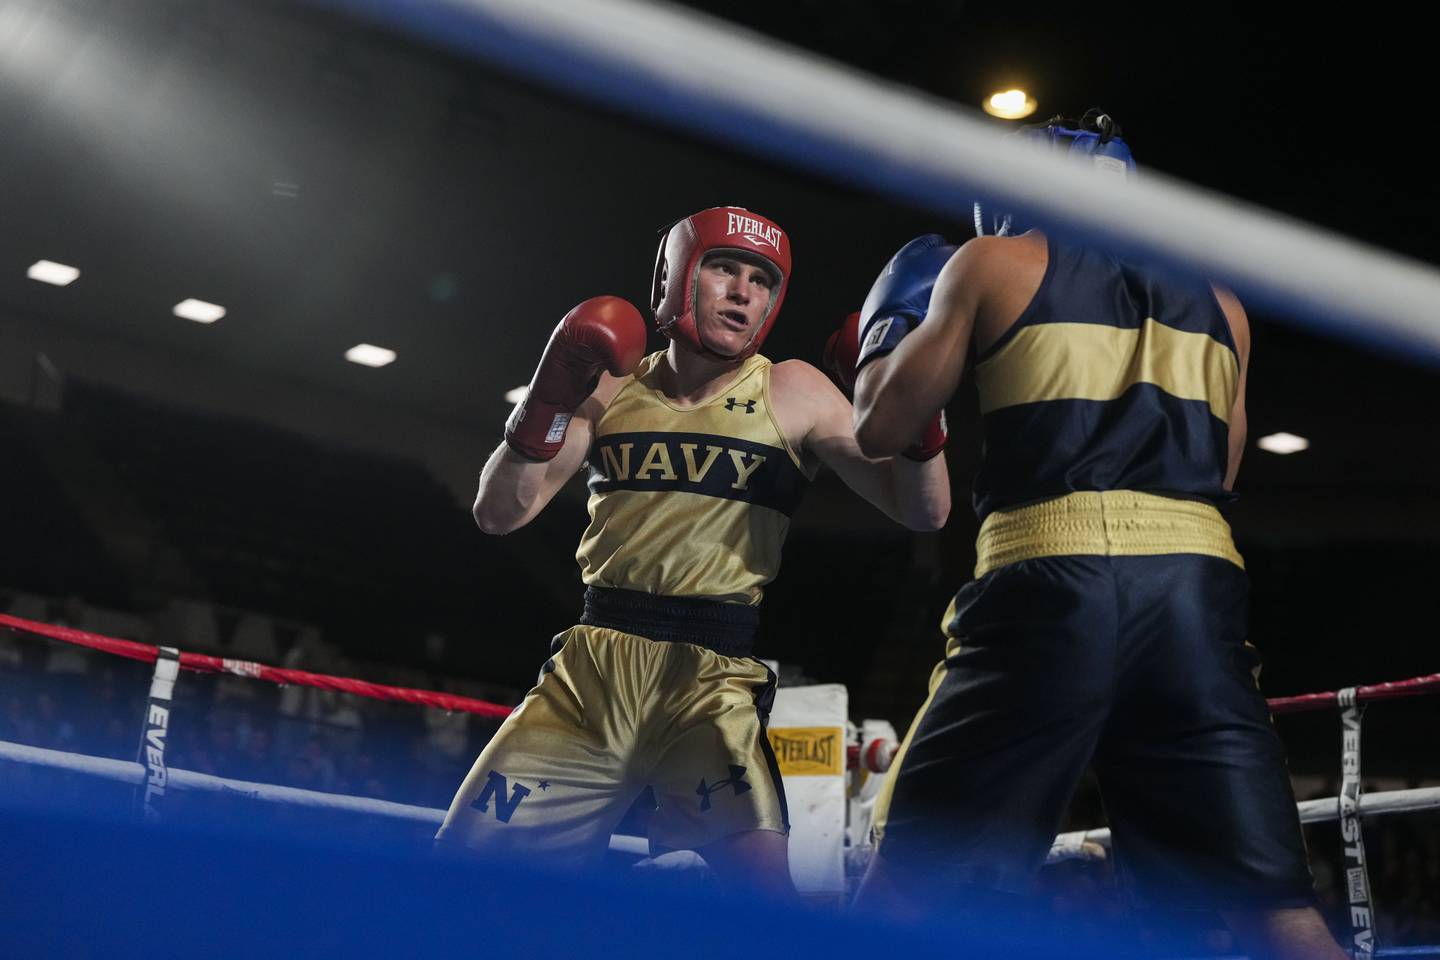 Getting the Shot The Naval Academy’s Brigade Boxing Championship The